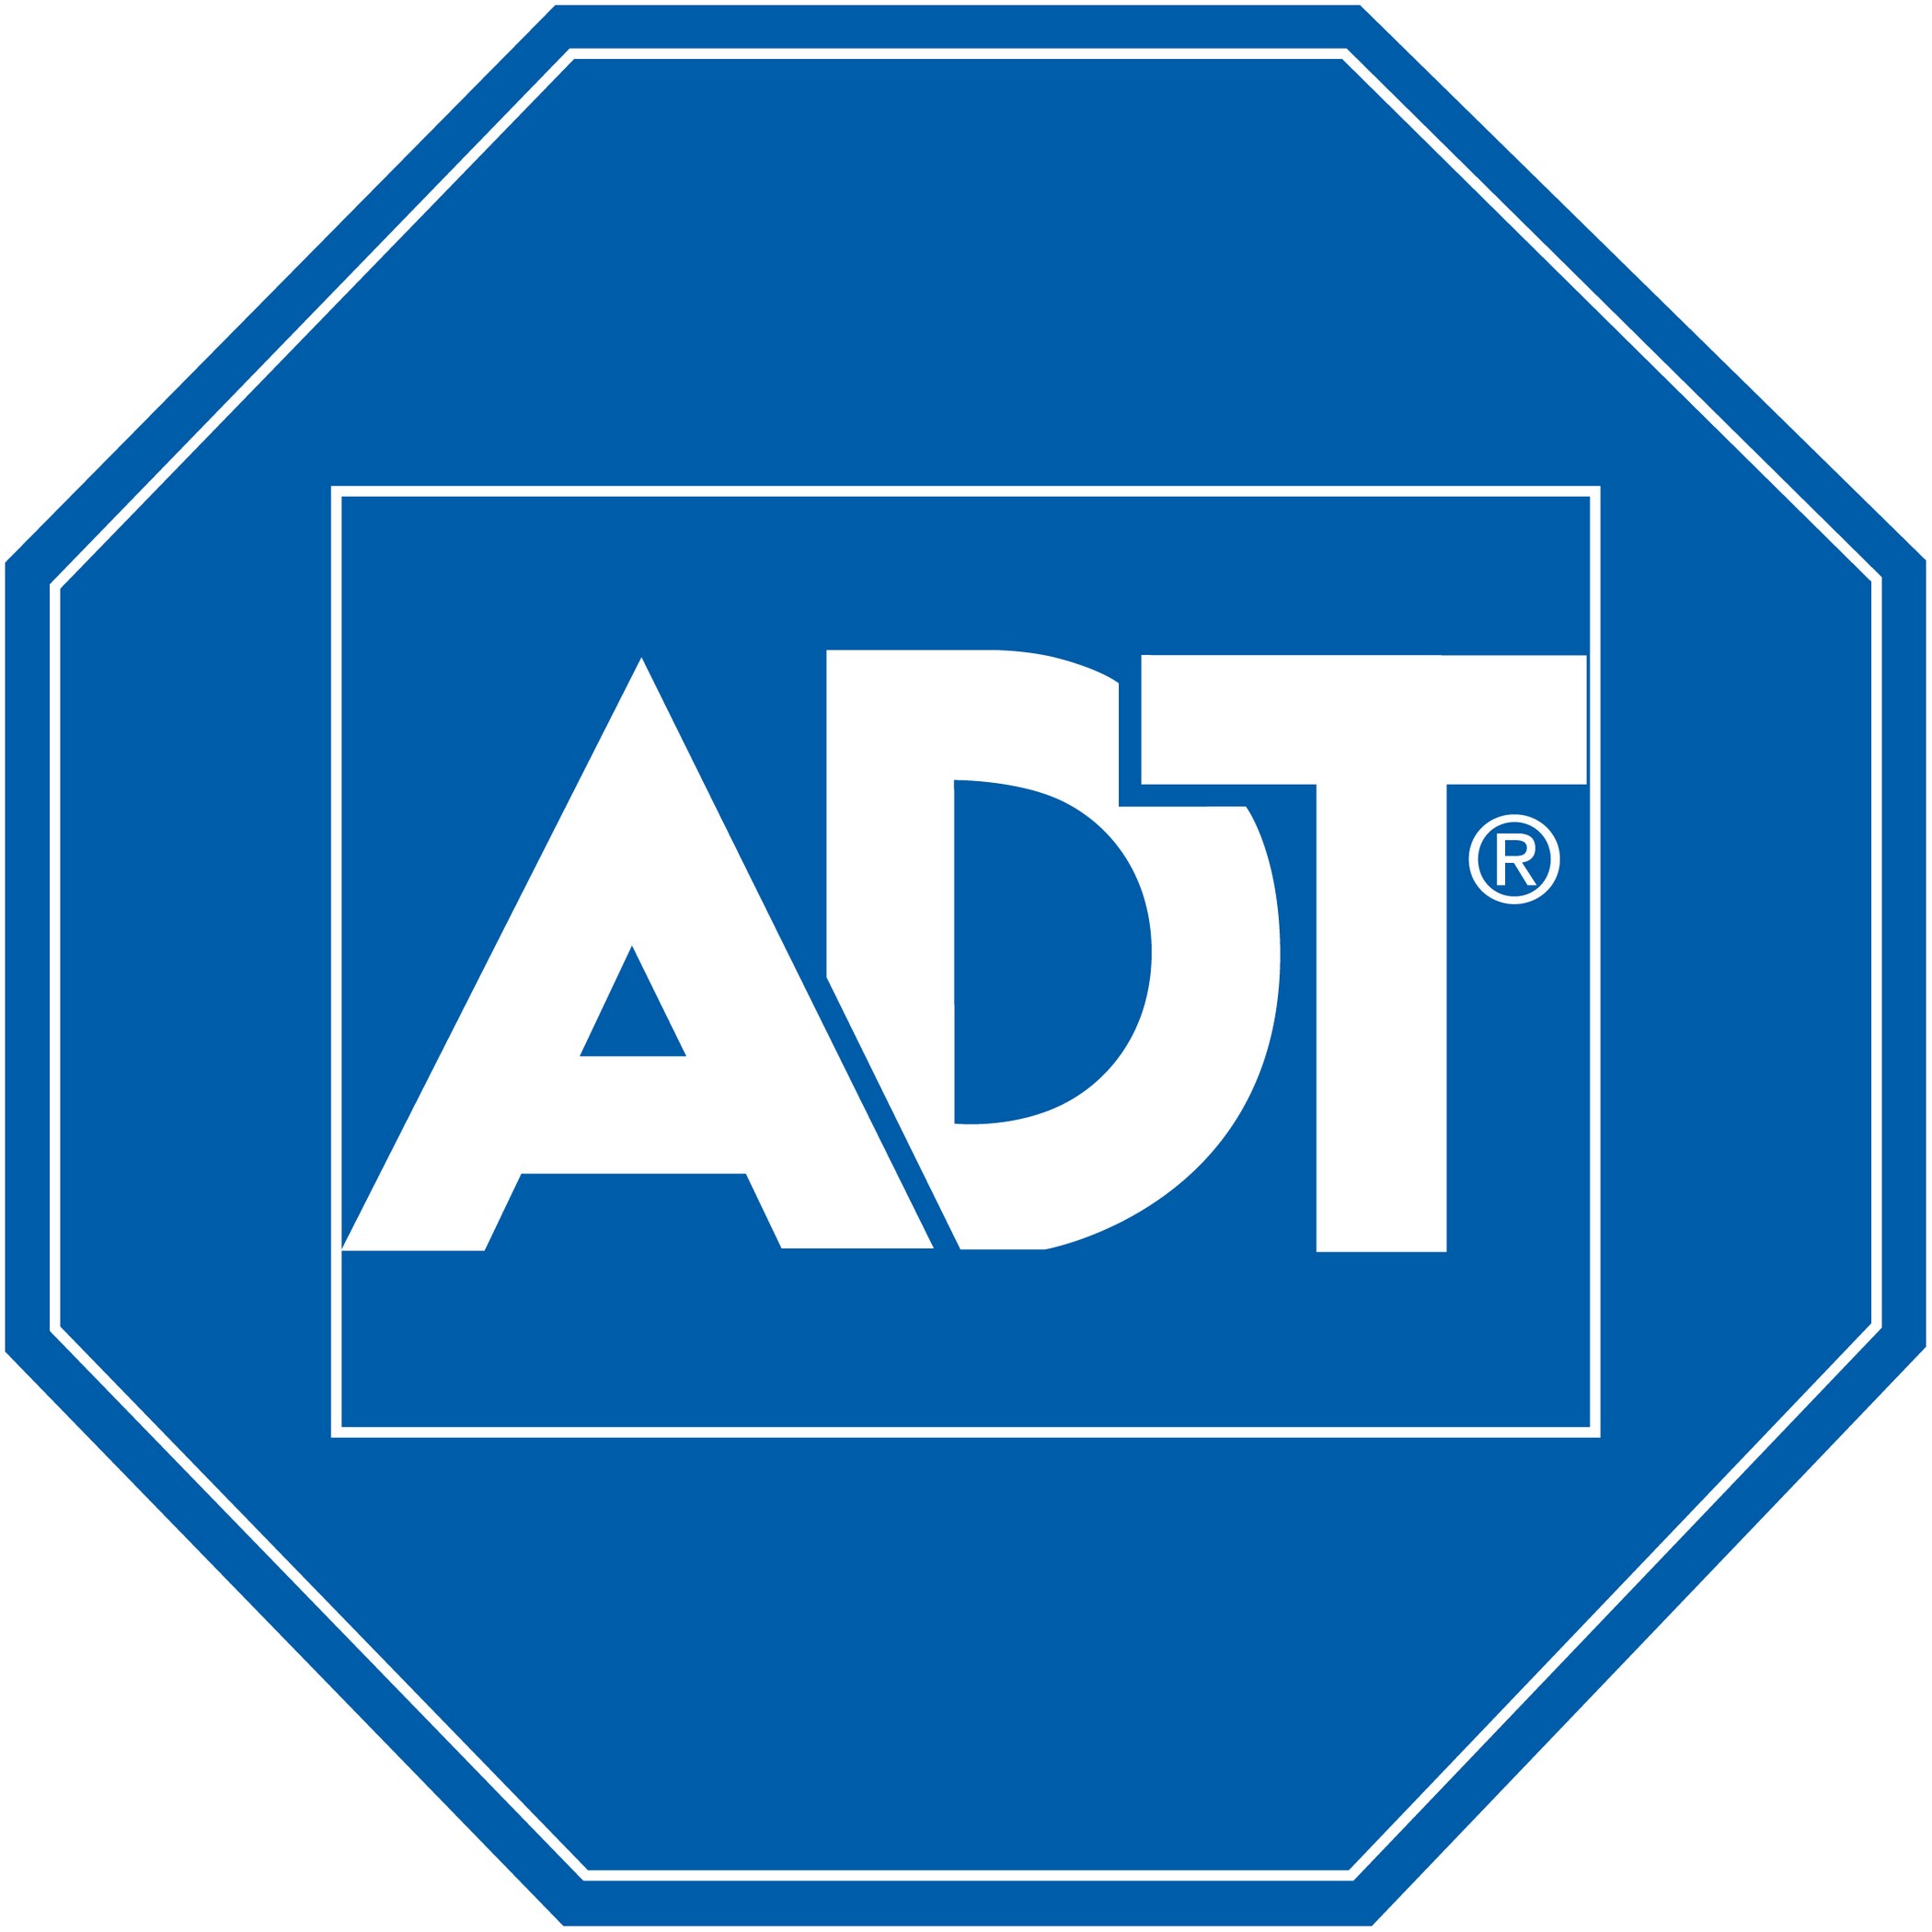 ADT Logo [EPS - Security Systems] Vector EPS Free Download, Logo ...